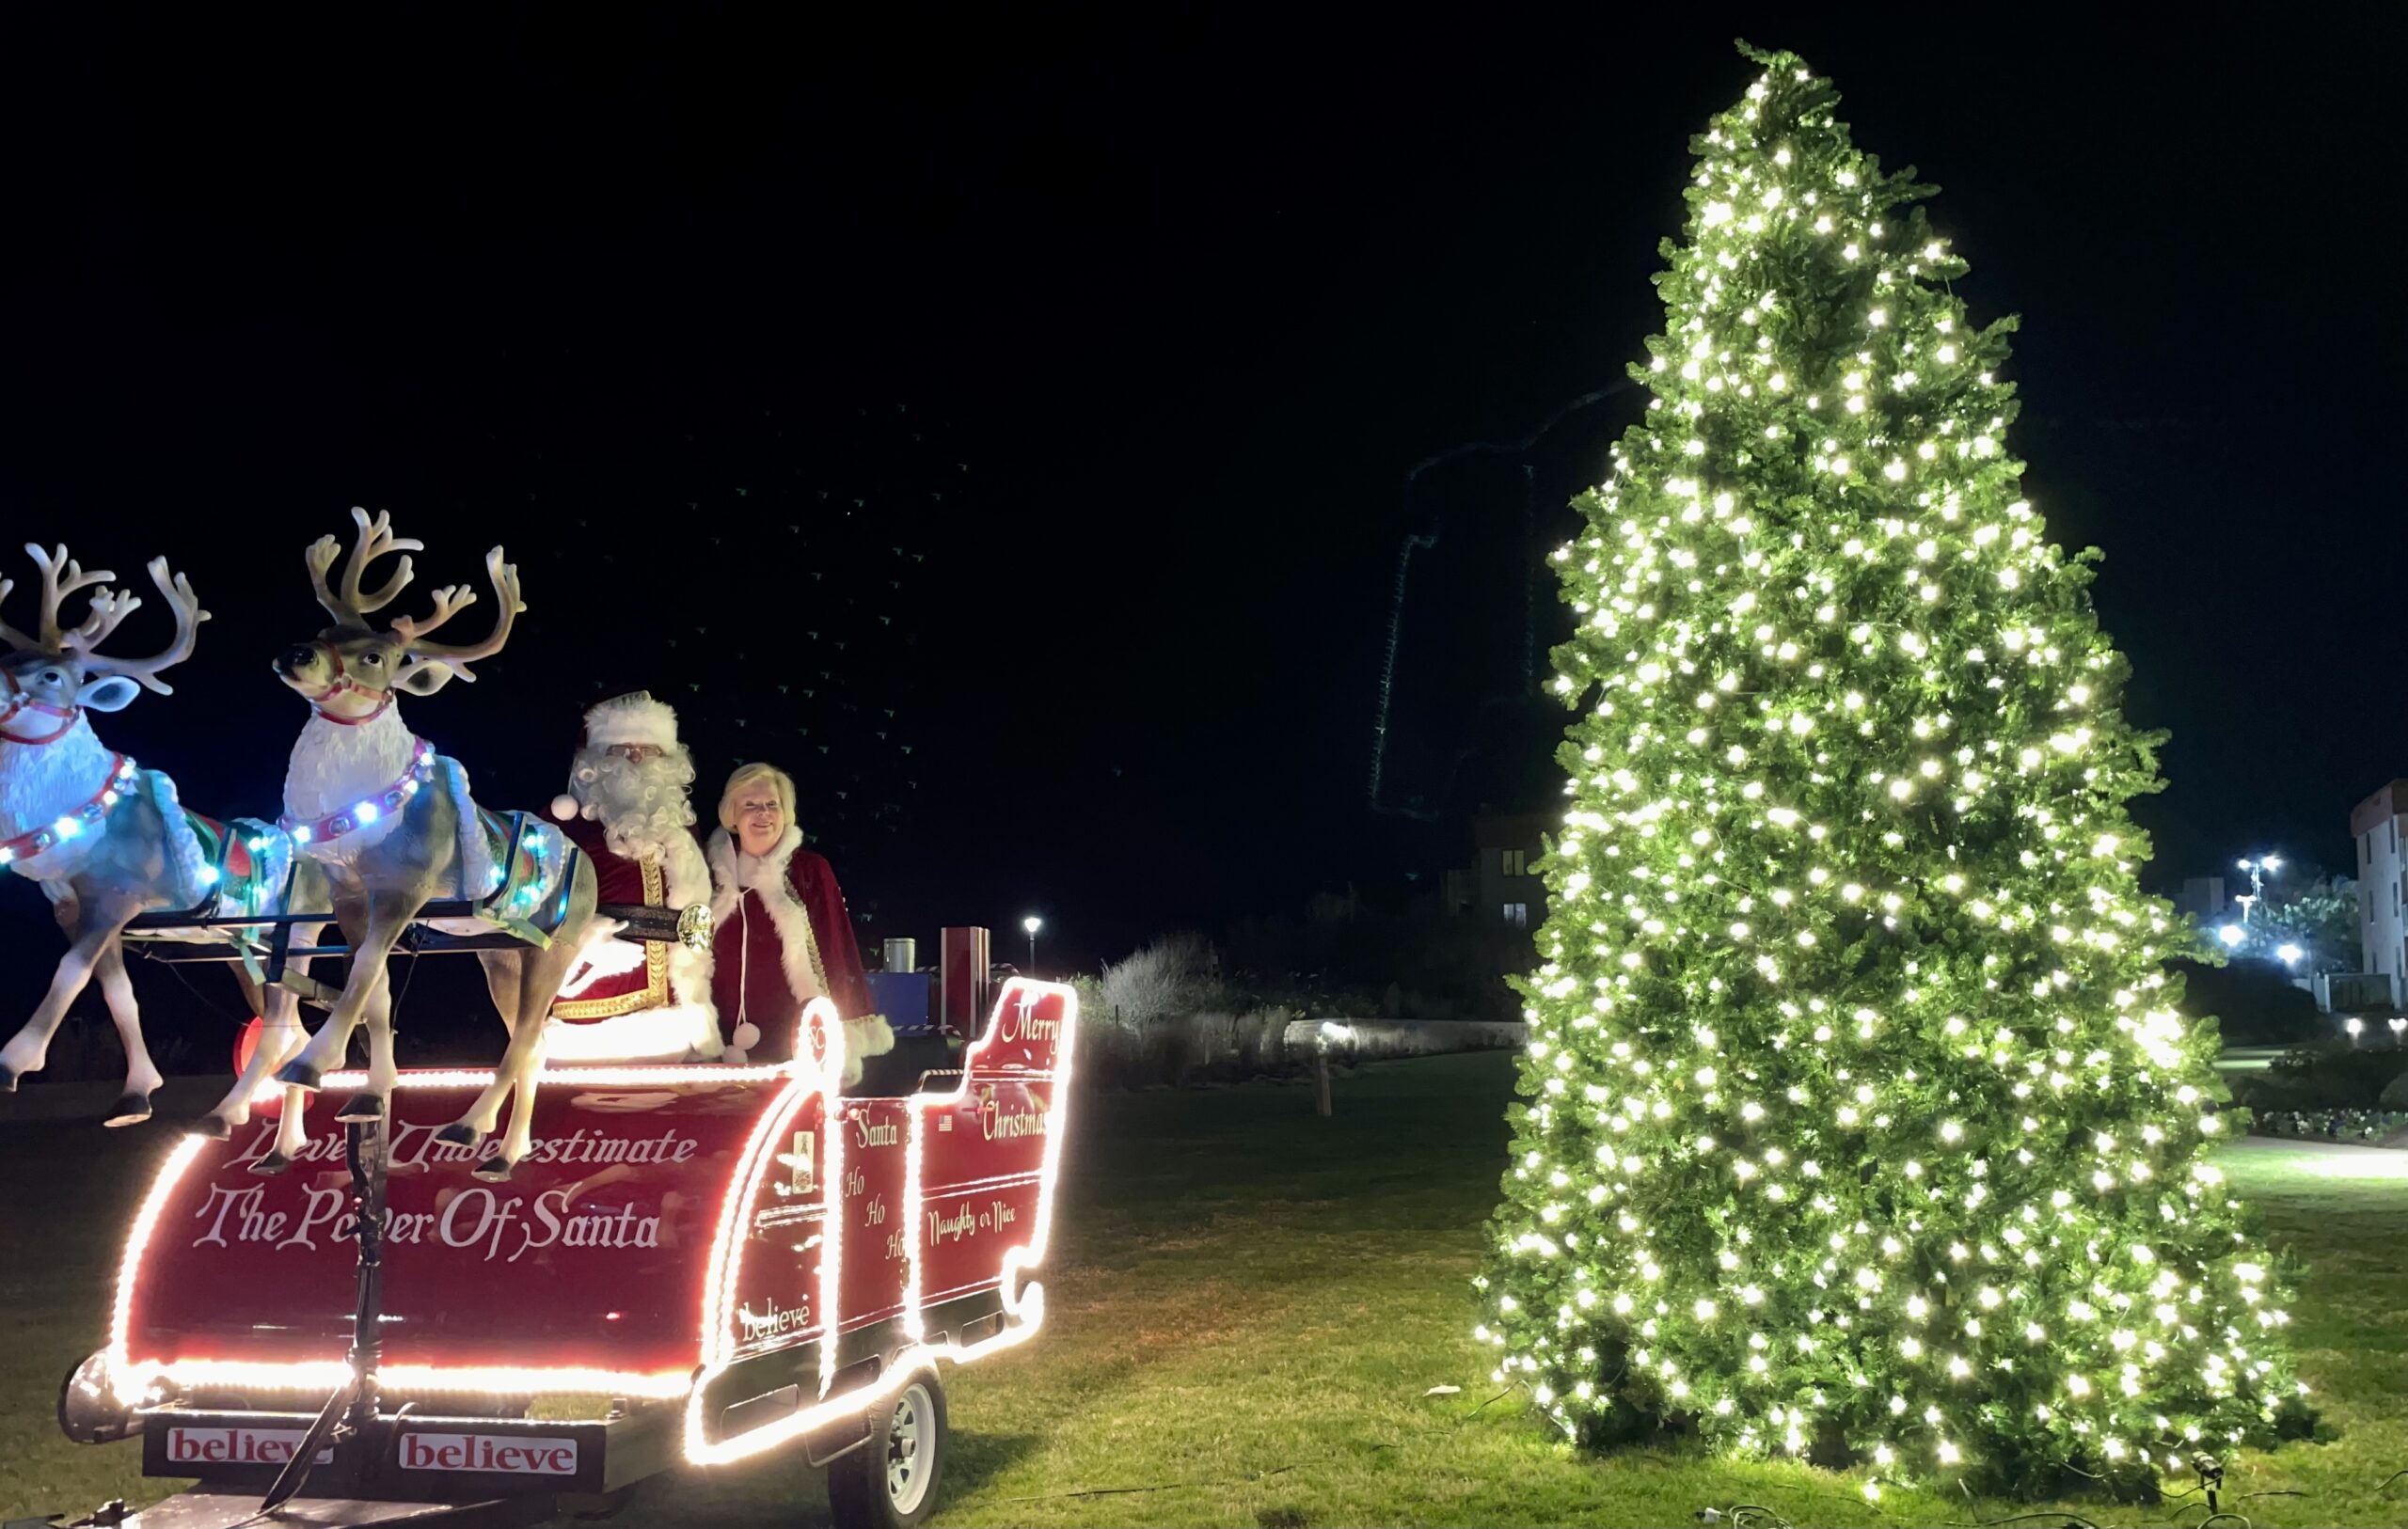 Santa Claus and Mrs. Claus on Sleigh